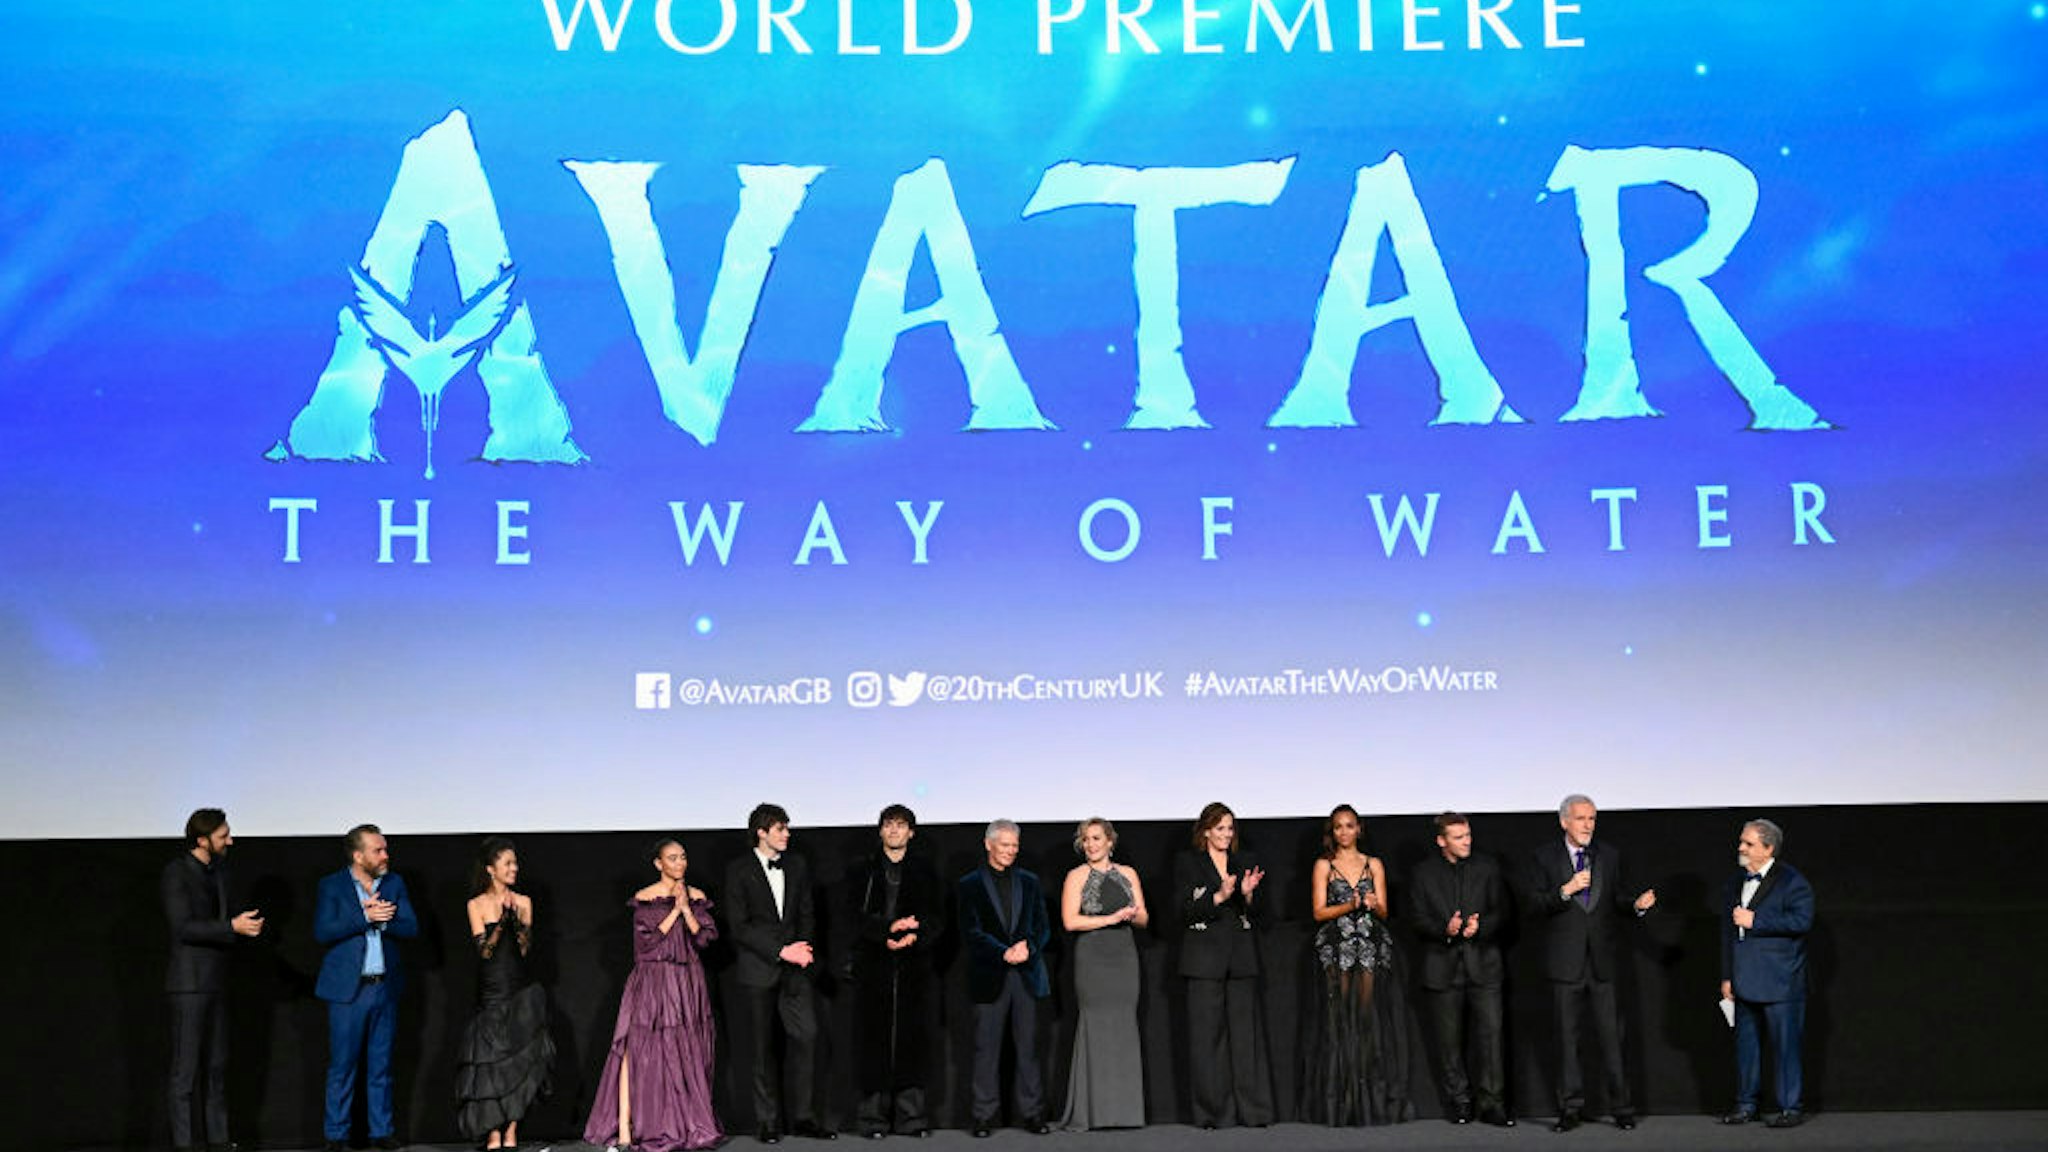 LONDON, ENGLAND - DECEMBER 06: (L-R) Joel David Moore, Brendan Cowell, Trinity Jo-Li Bliss, Bailey Bass, Jack Champion, Jamie Flatters, Stephen Lang, Kate Winslet, Sigourney Weaver, Zoe Saldana, Sam Worthington, James Cameron and Jon Landau at the world premiere of James Cameron's "Avatar: The Way of Water" at the Odeon Luxe Leicester Square on December 06, 2022 in London, England. (Photo by Gareth Cattermole/Getty Images for Disney)